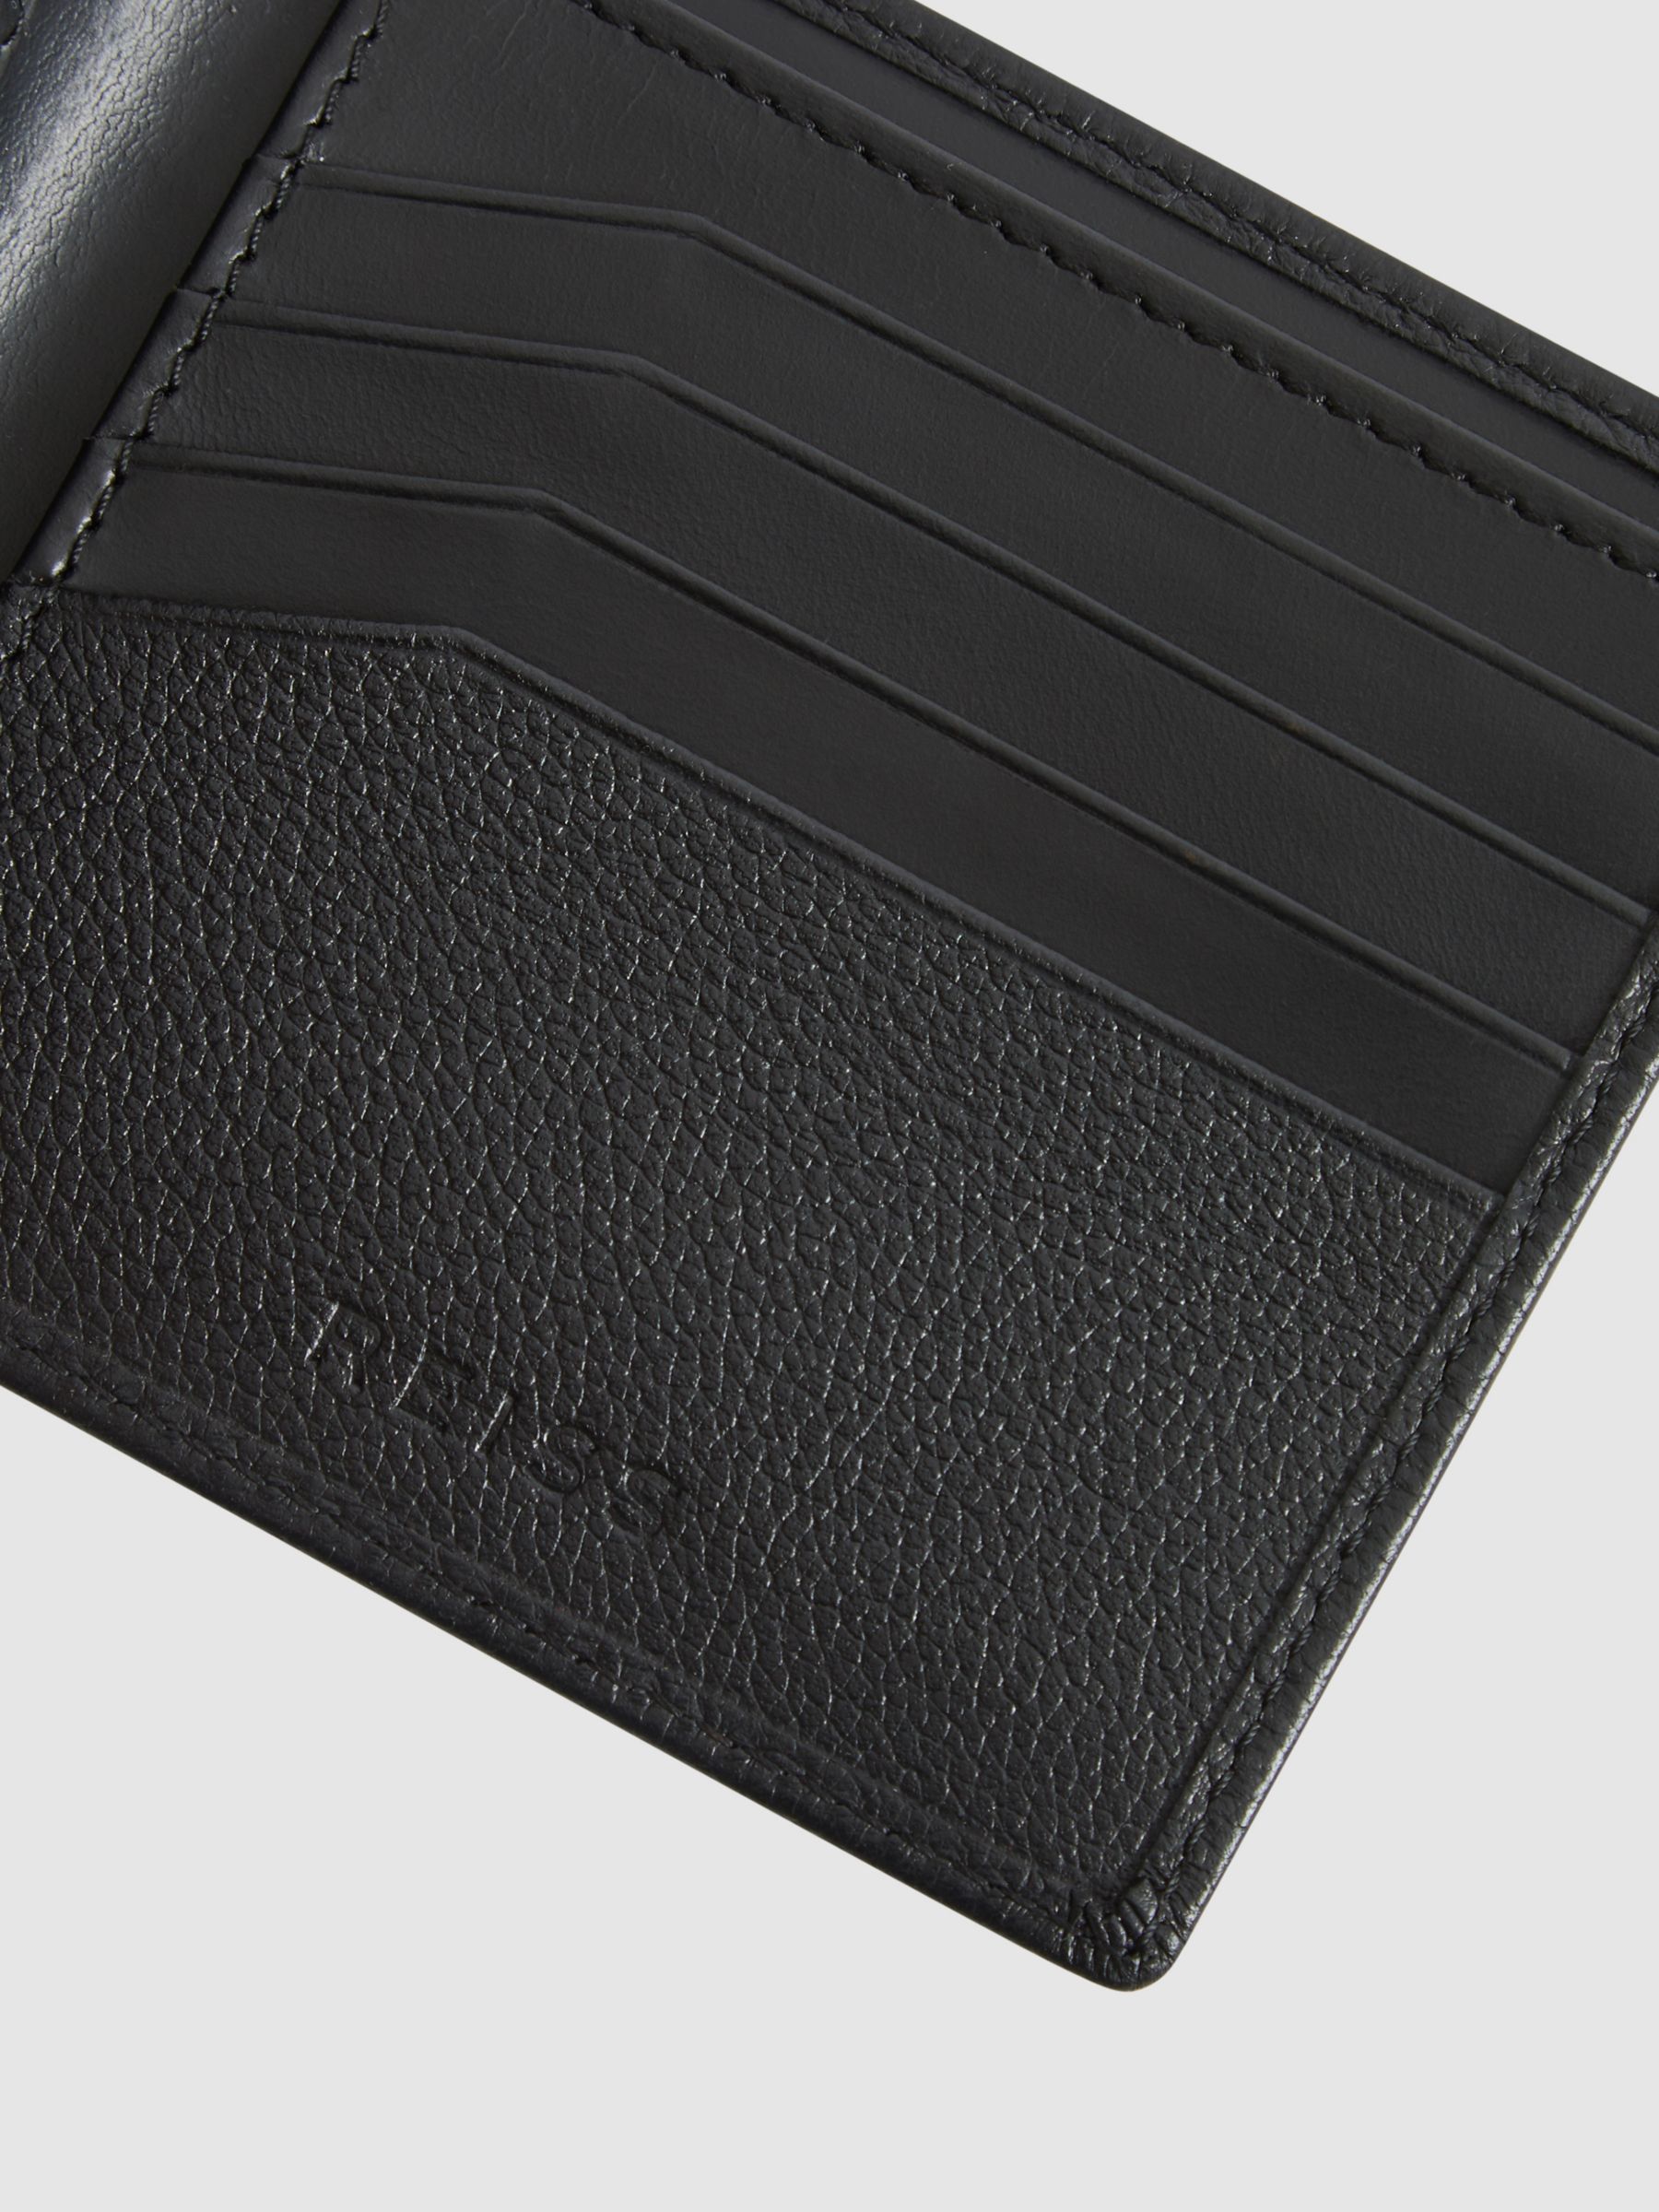 Reiss Cabot Leather Wallet, Black at John Lewis & Partners